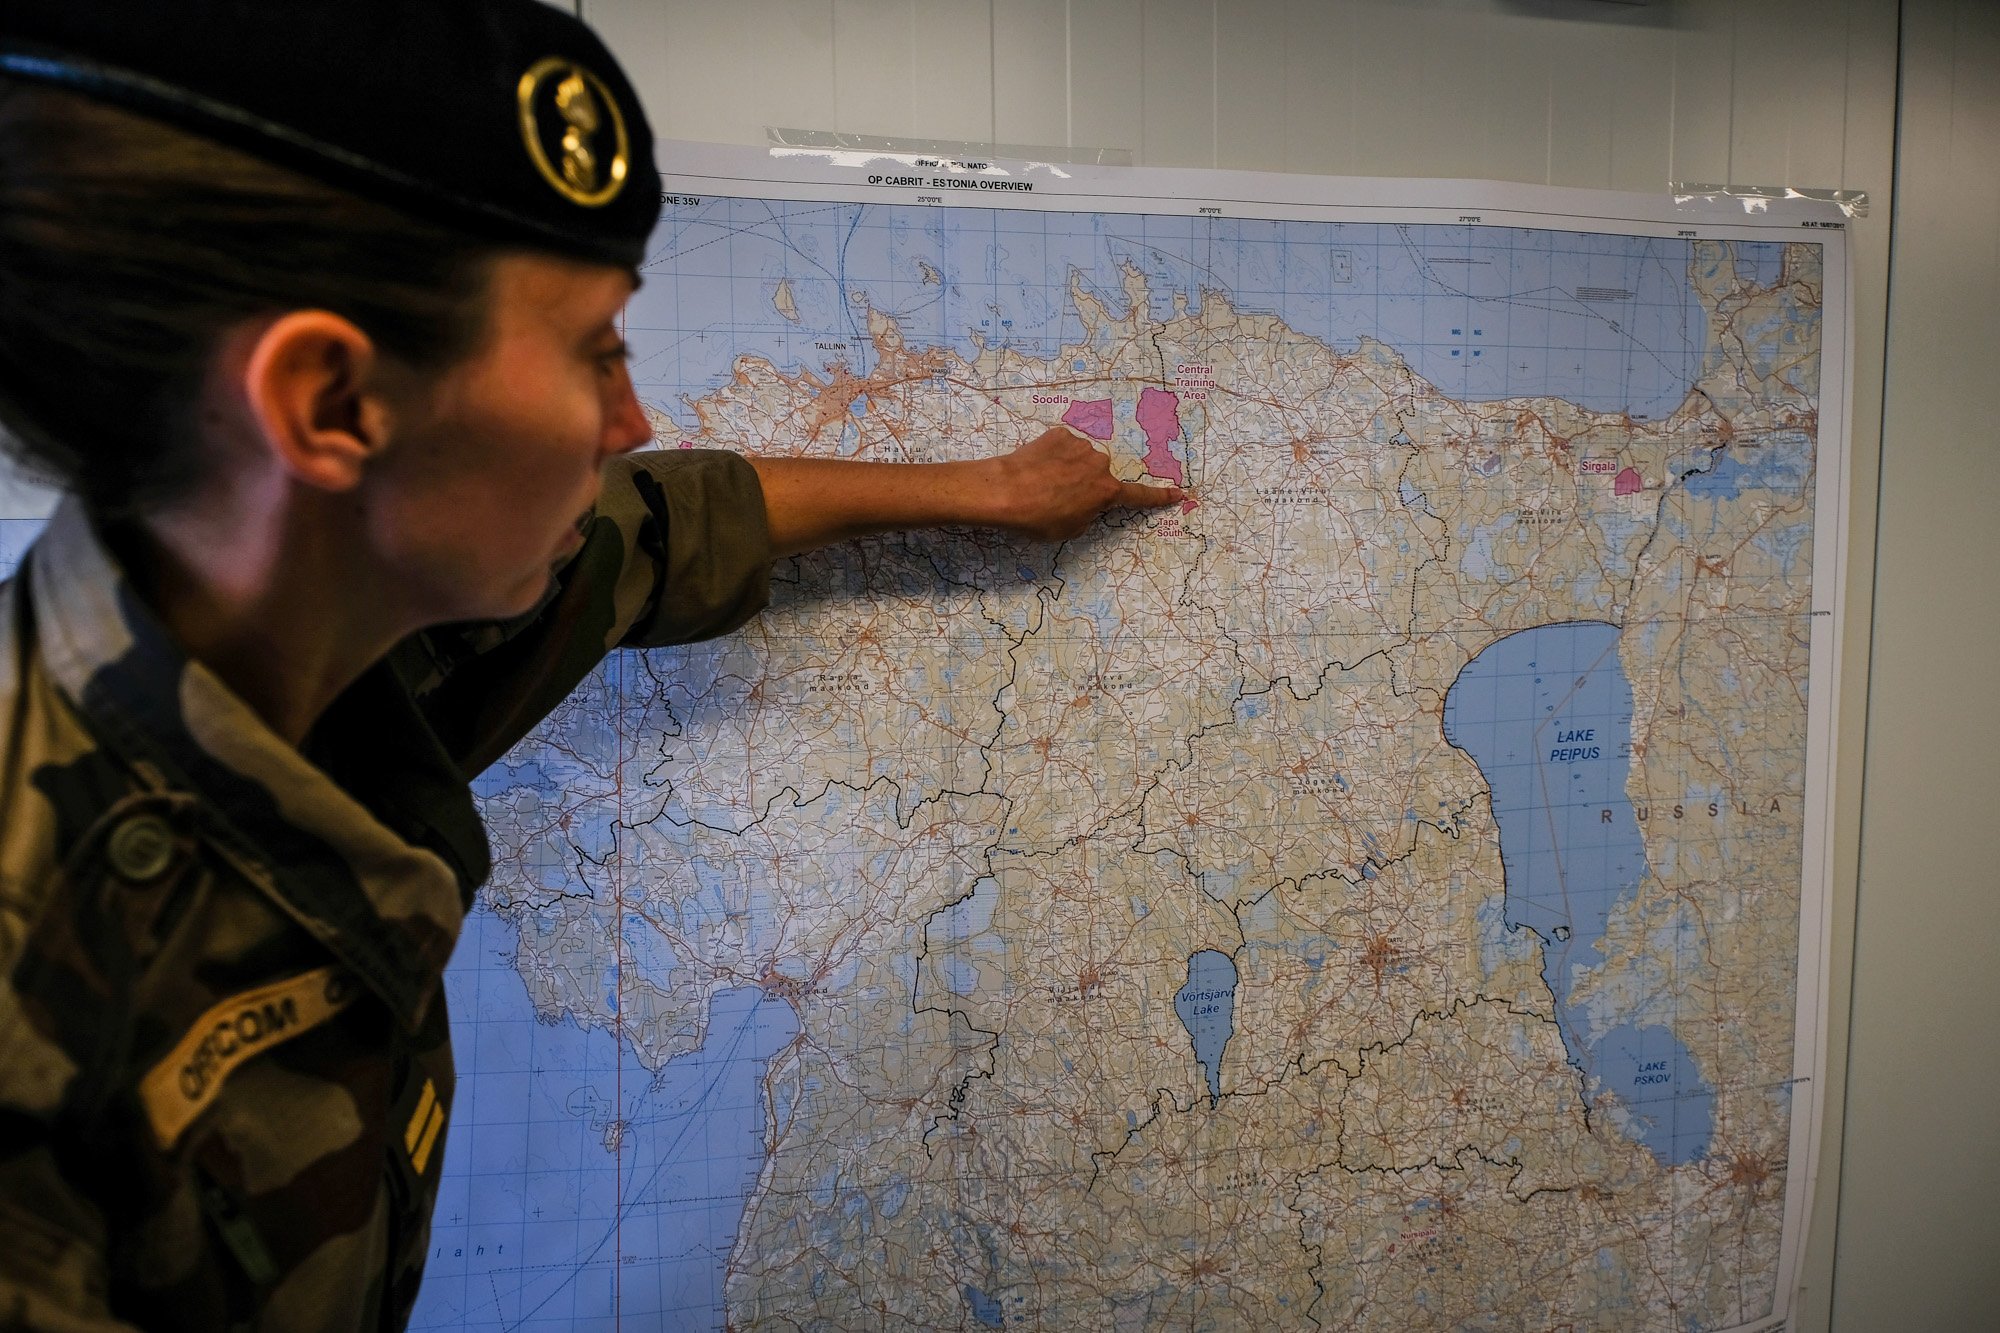 Estonia - Nato Battle group - French army Lynx operation face to